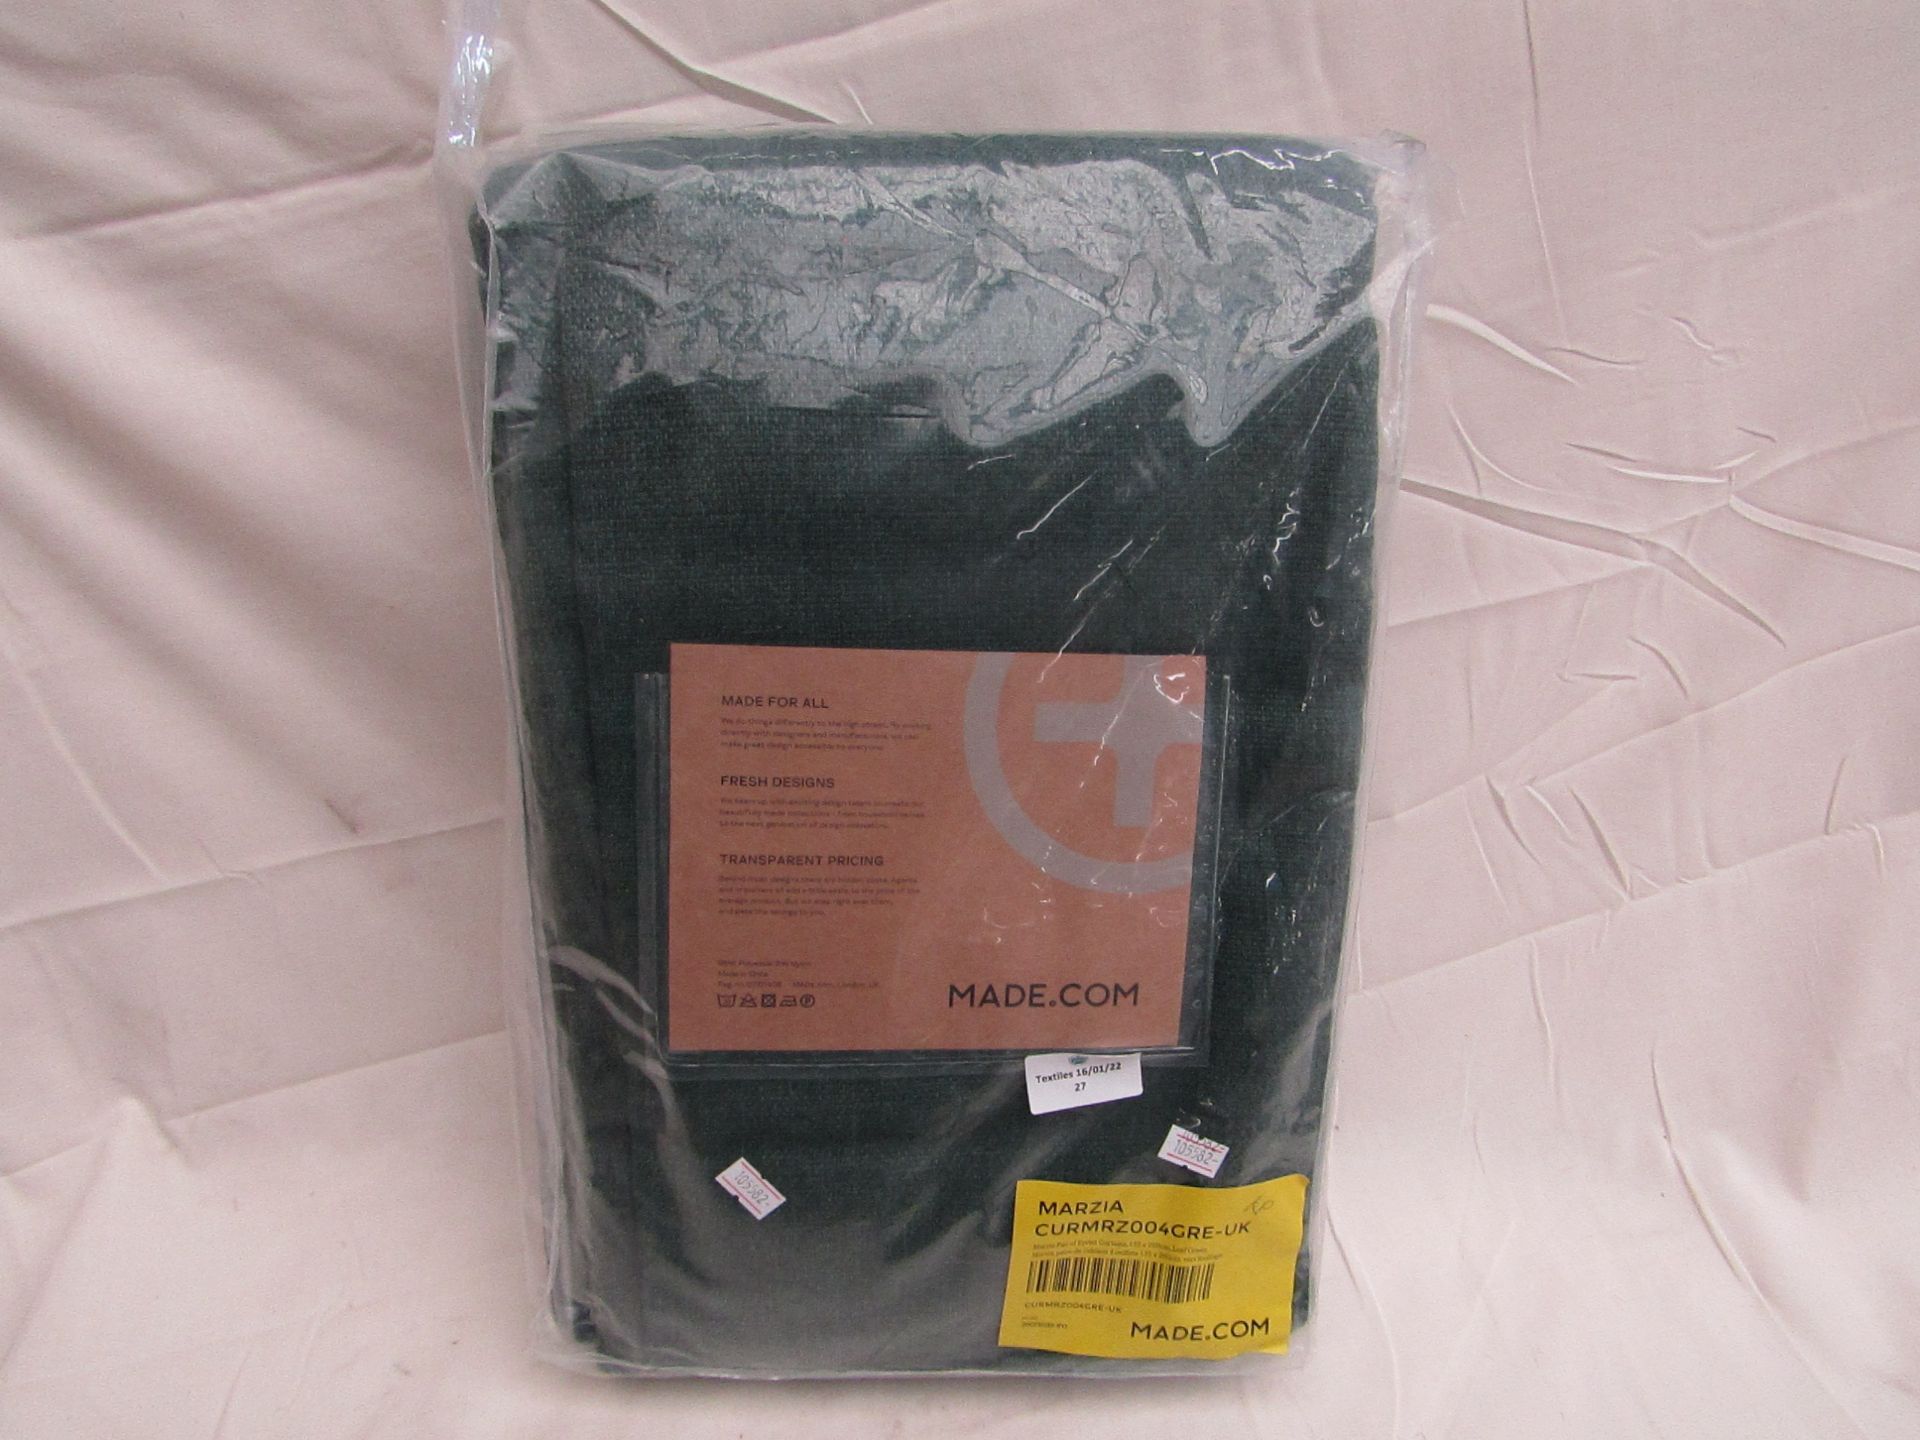 | 1X | MADE.COM PAIR OF EYELET CURTAINS, 135 X 260CM, LEAF GREEN | UNCHECKED & PACKAGED |